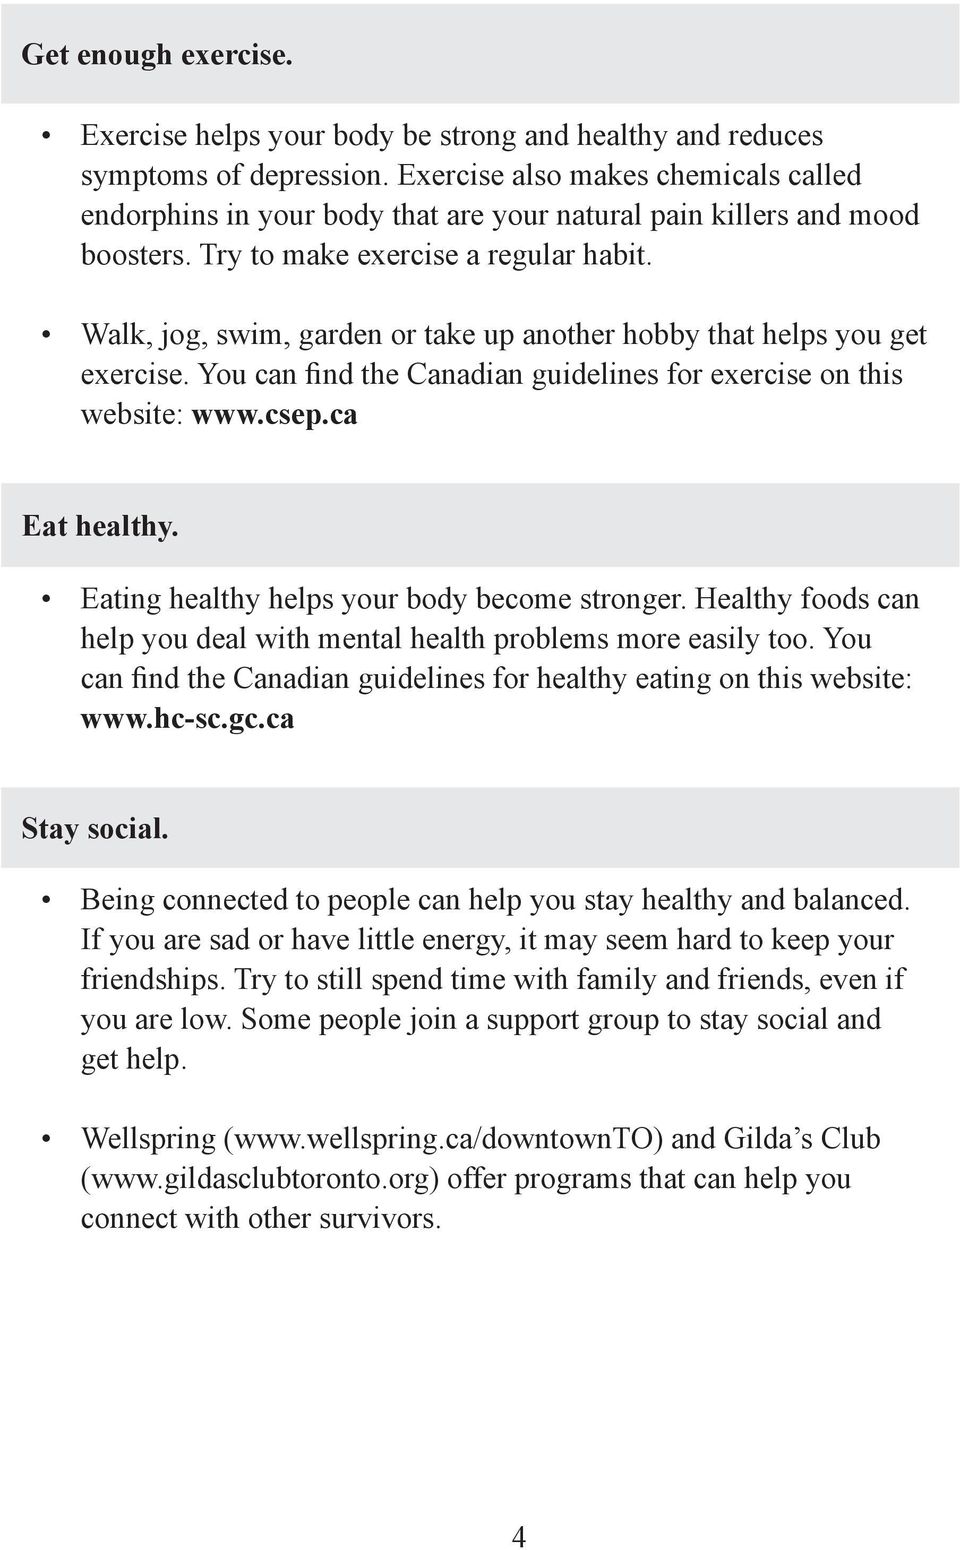 Walk, jog, swim, garden or take up another hobby that helps you get exercise. You can find the Canadian guidelines for exercise on this website: www.csep.ca Eat healthy.